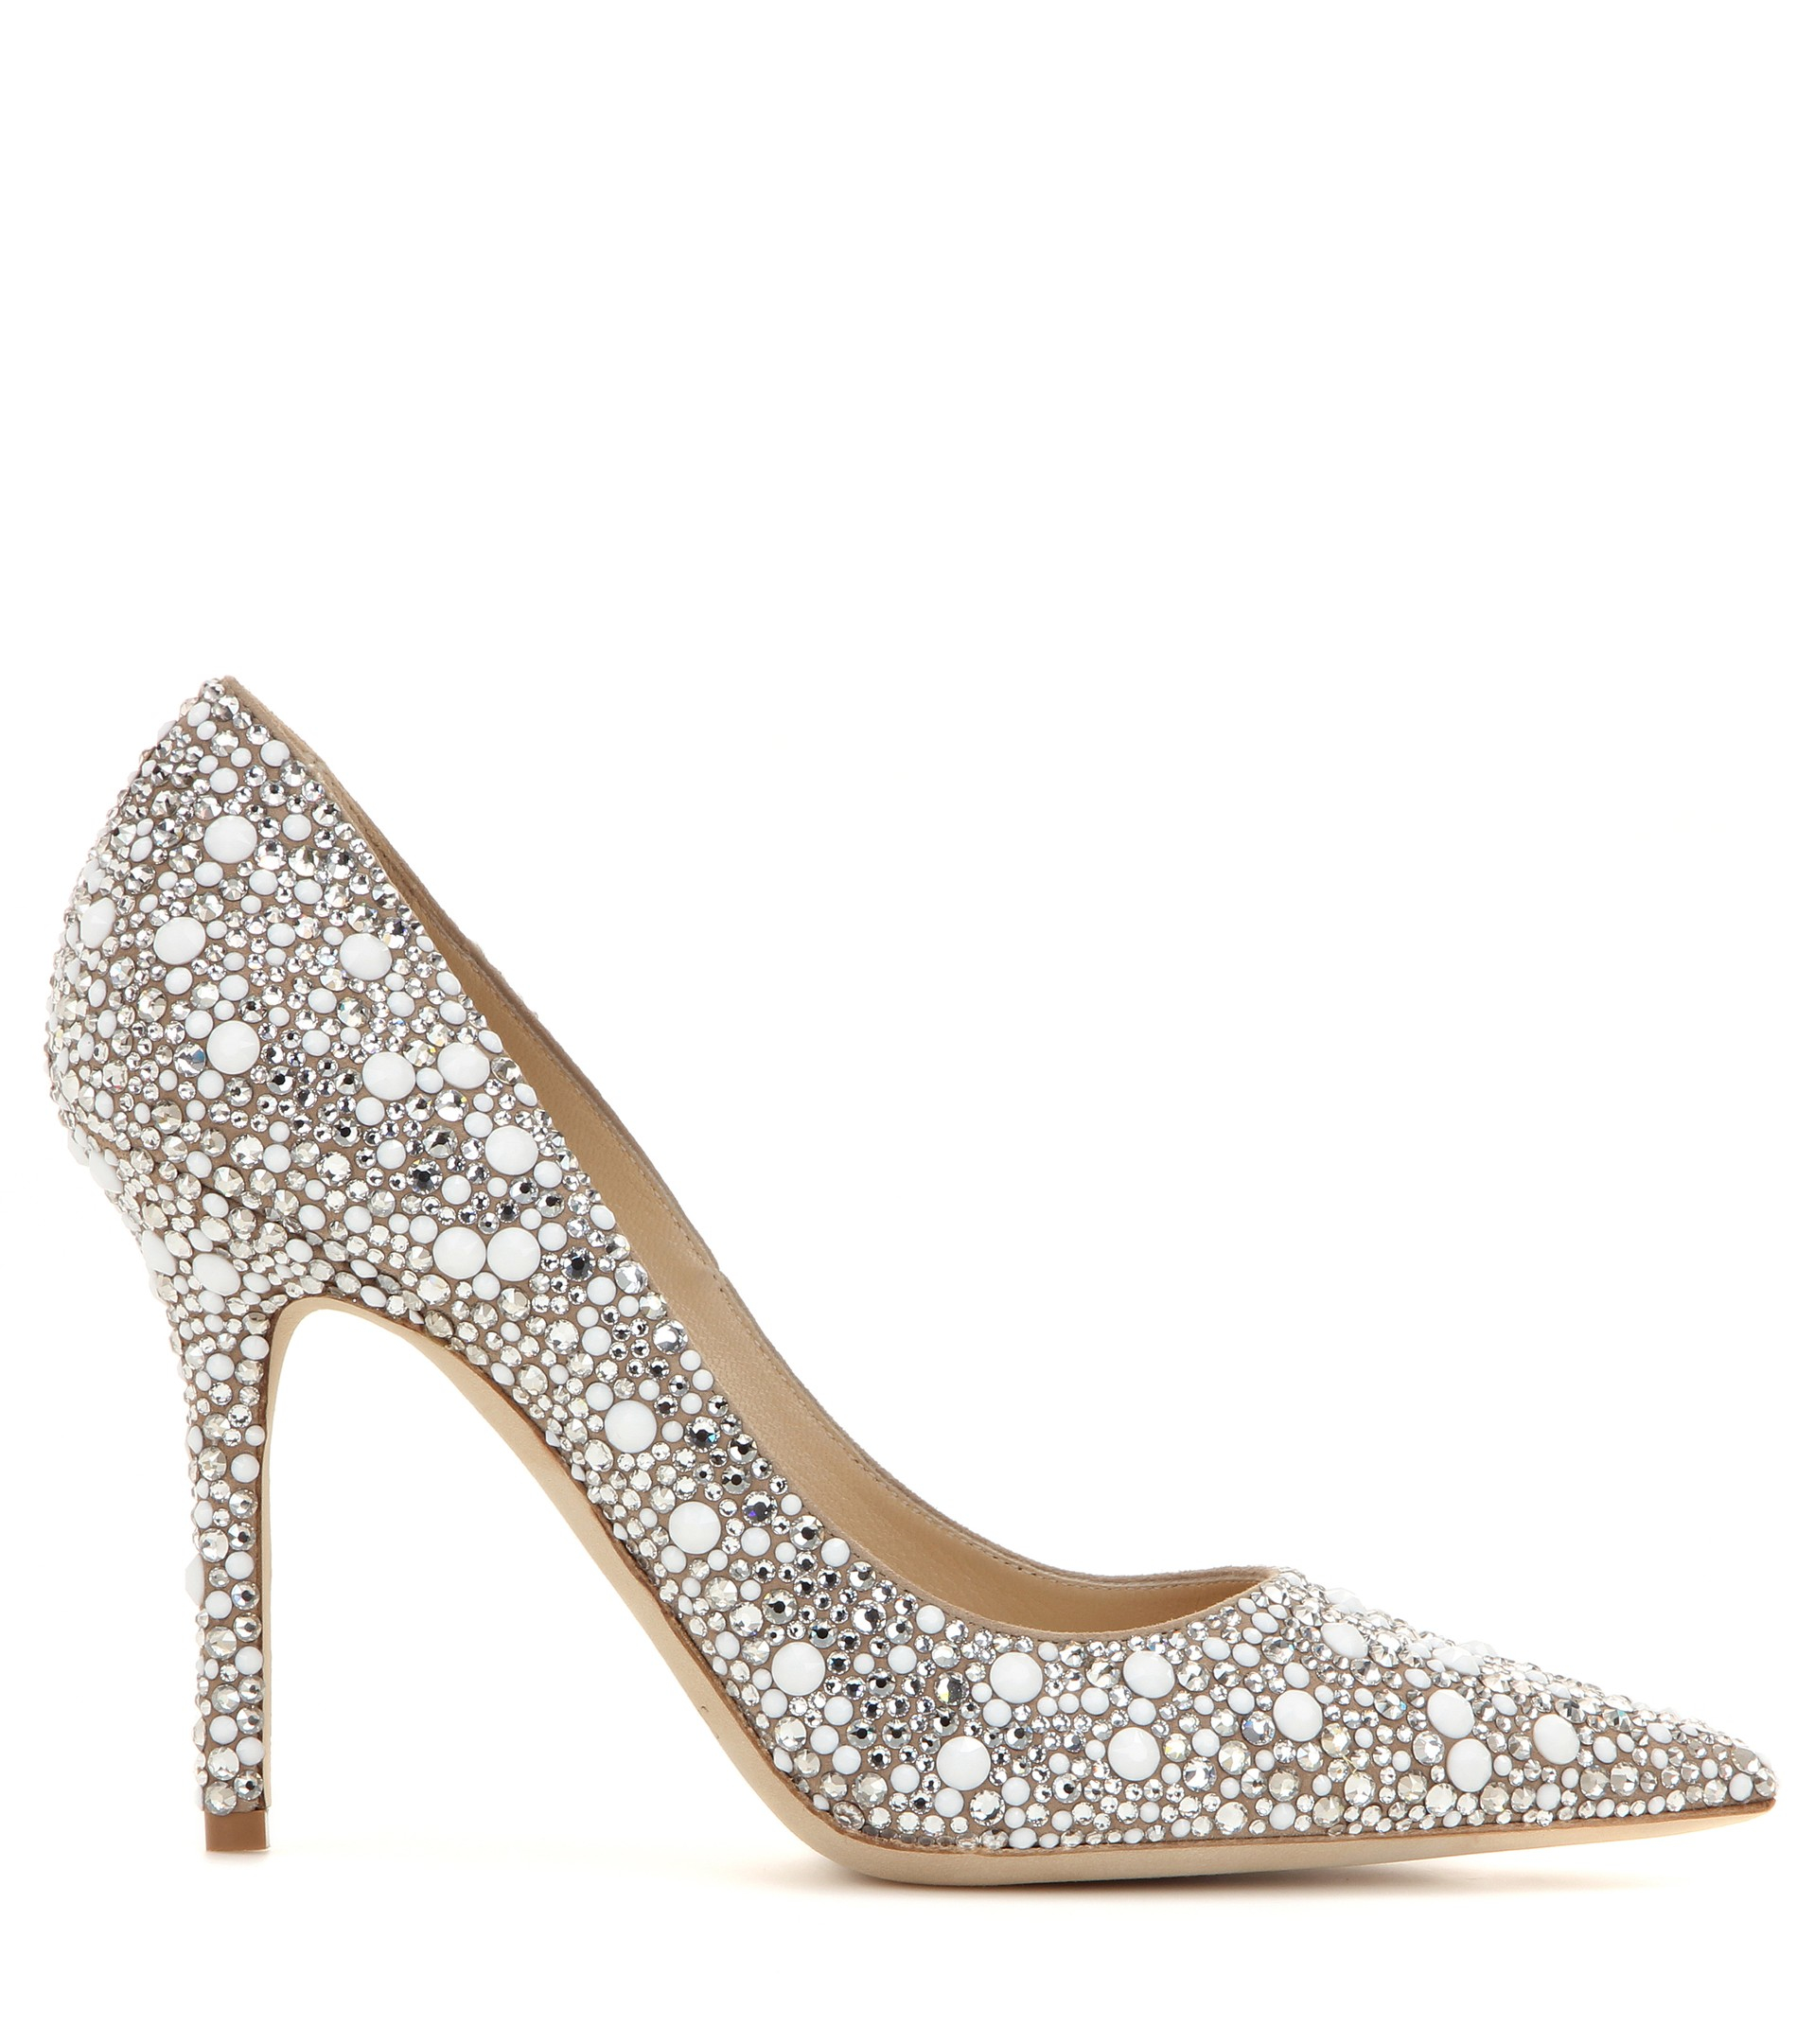 Lyst - Jimmy Choo Abel Embellished Suede Pumps in White